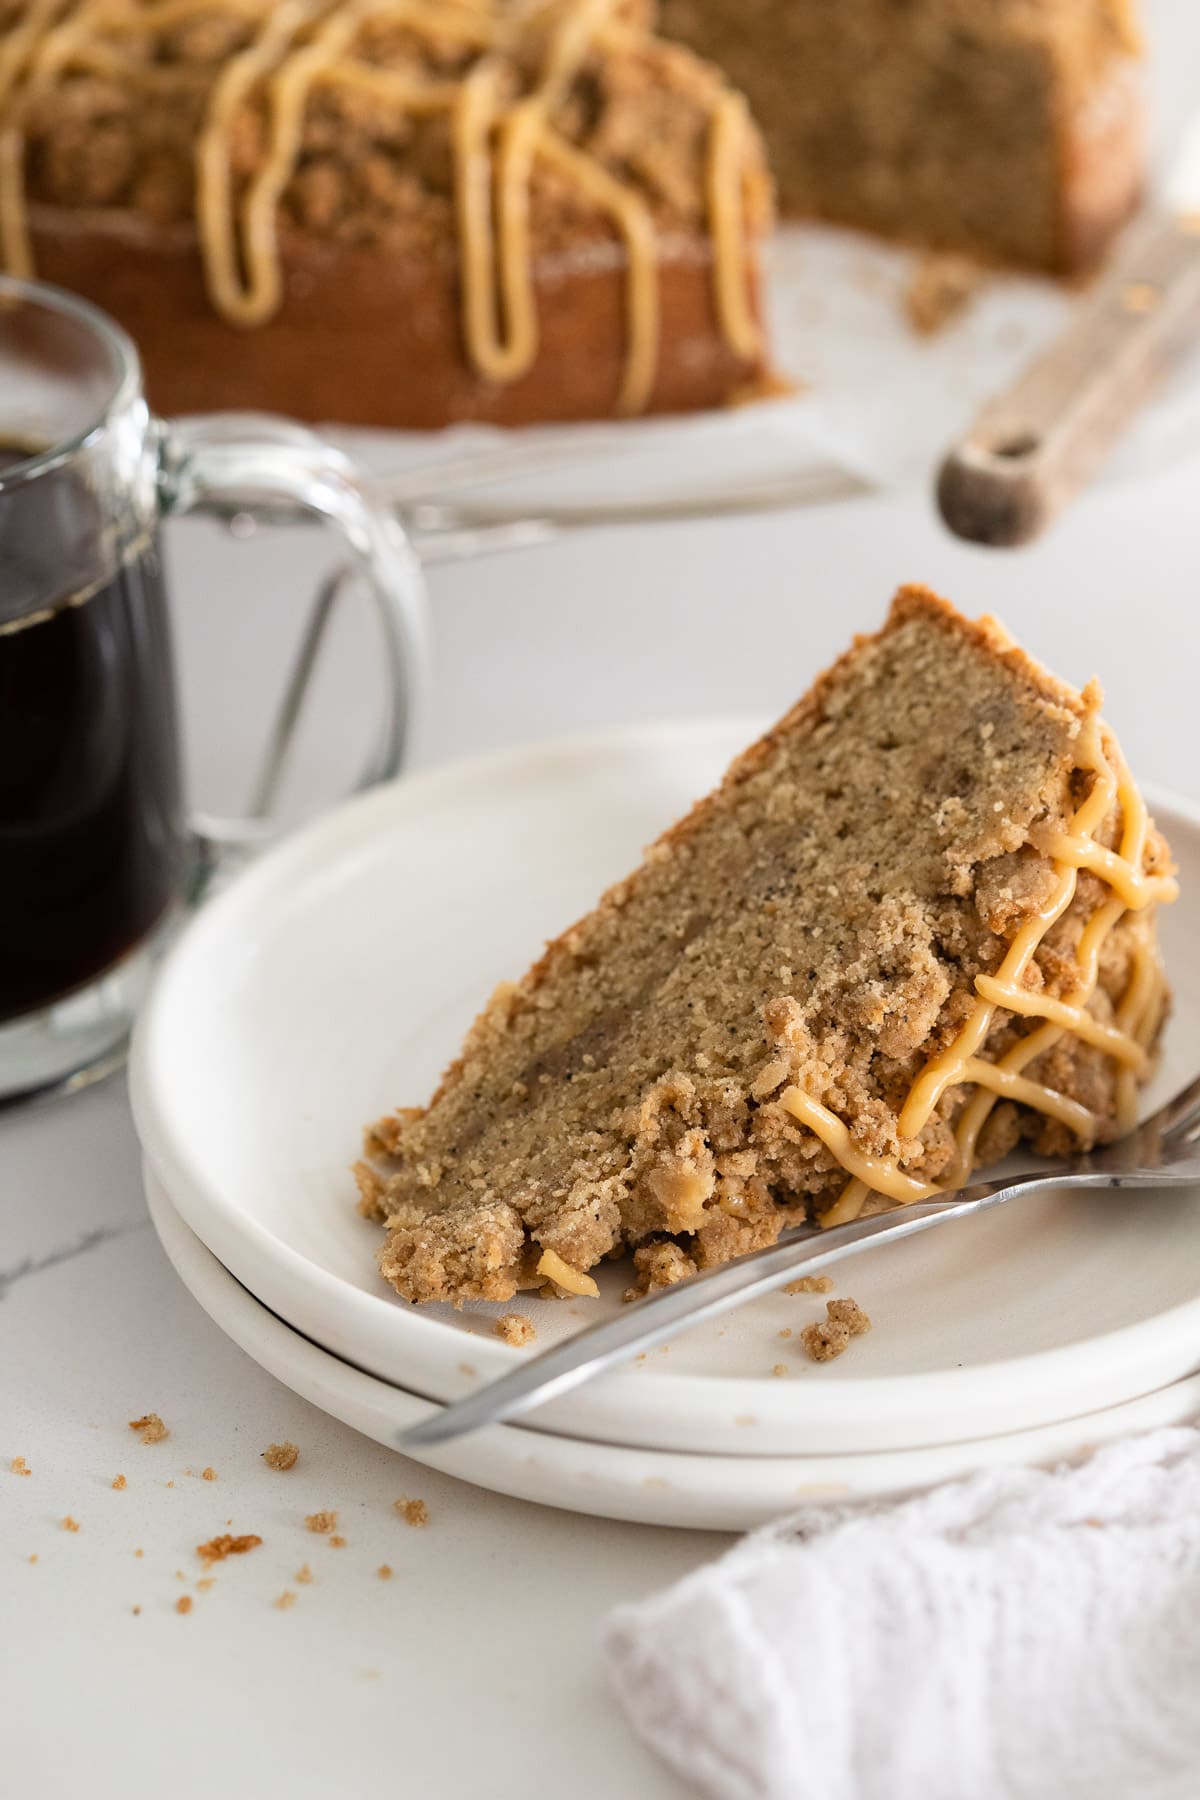 A slice of coffee cake on a plate, served with coffee.